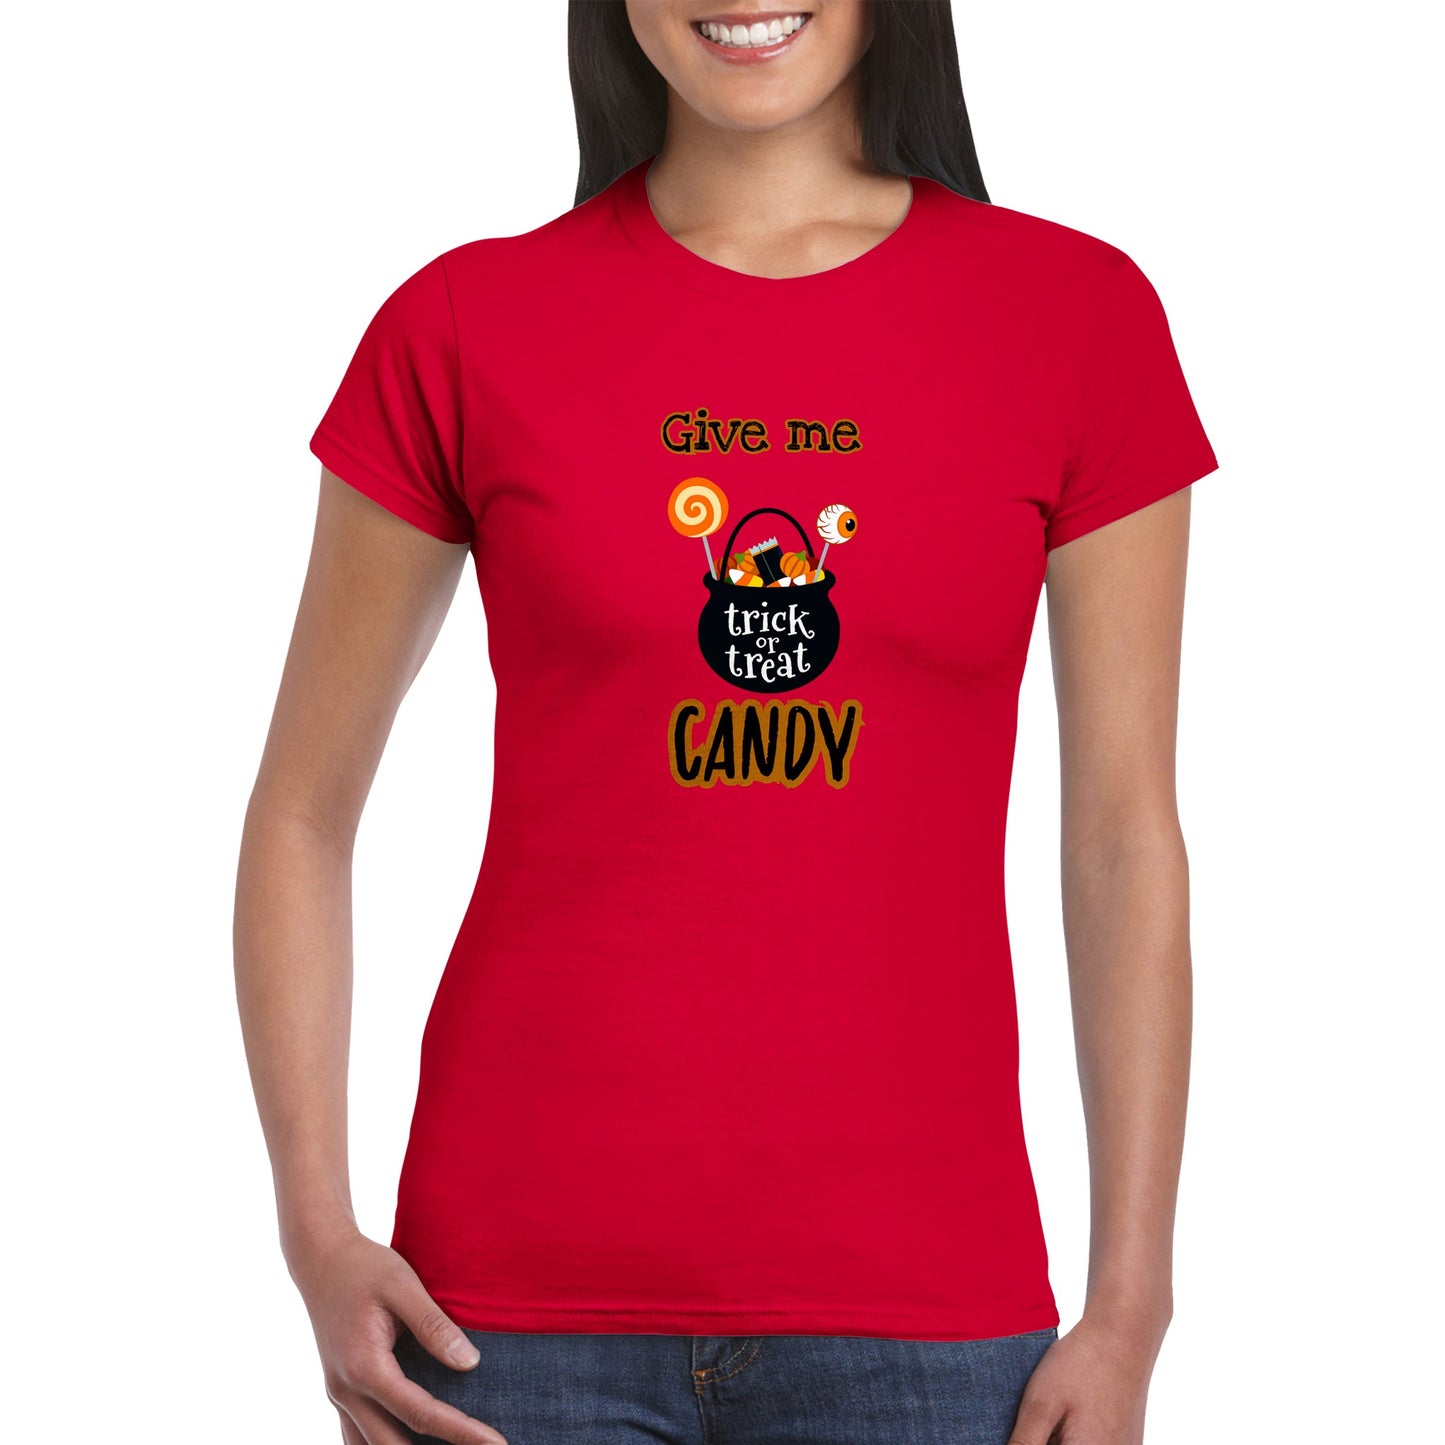 Give me candy -Classic Womens Crewneck T-shirt